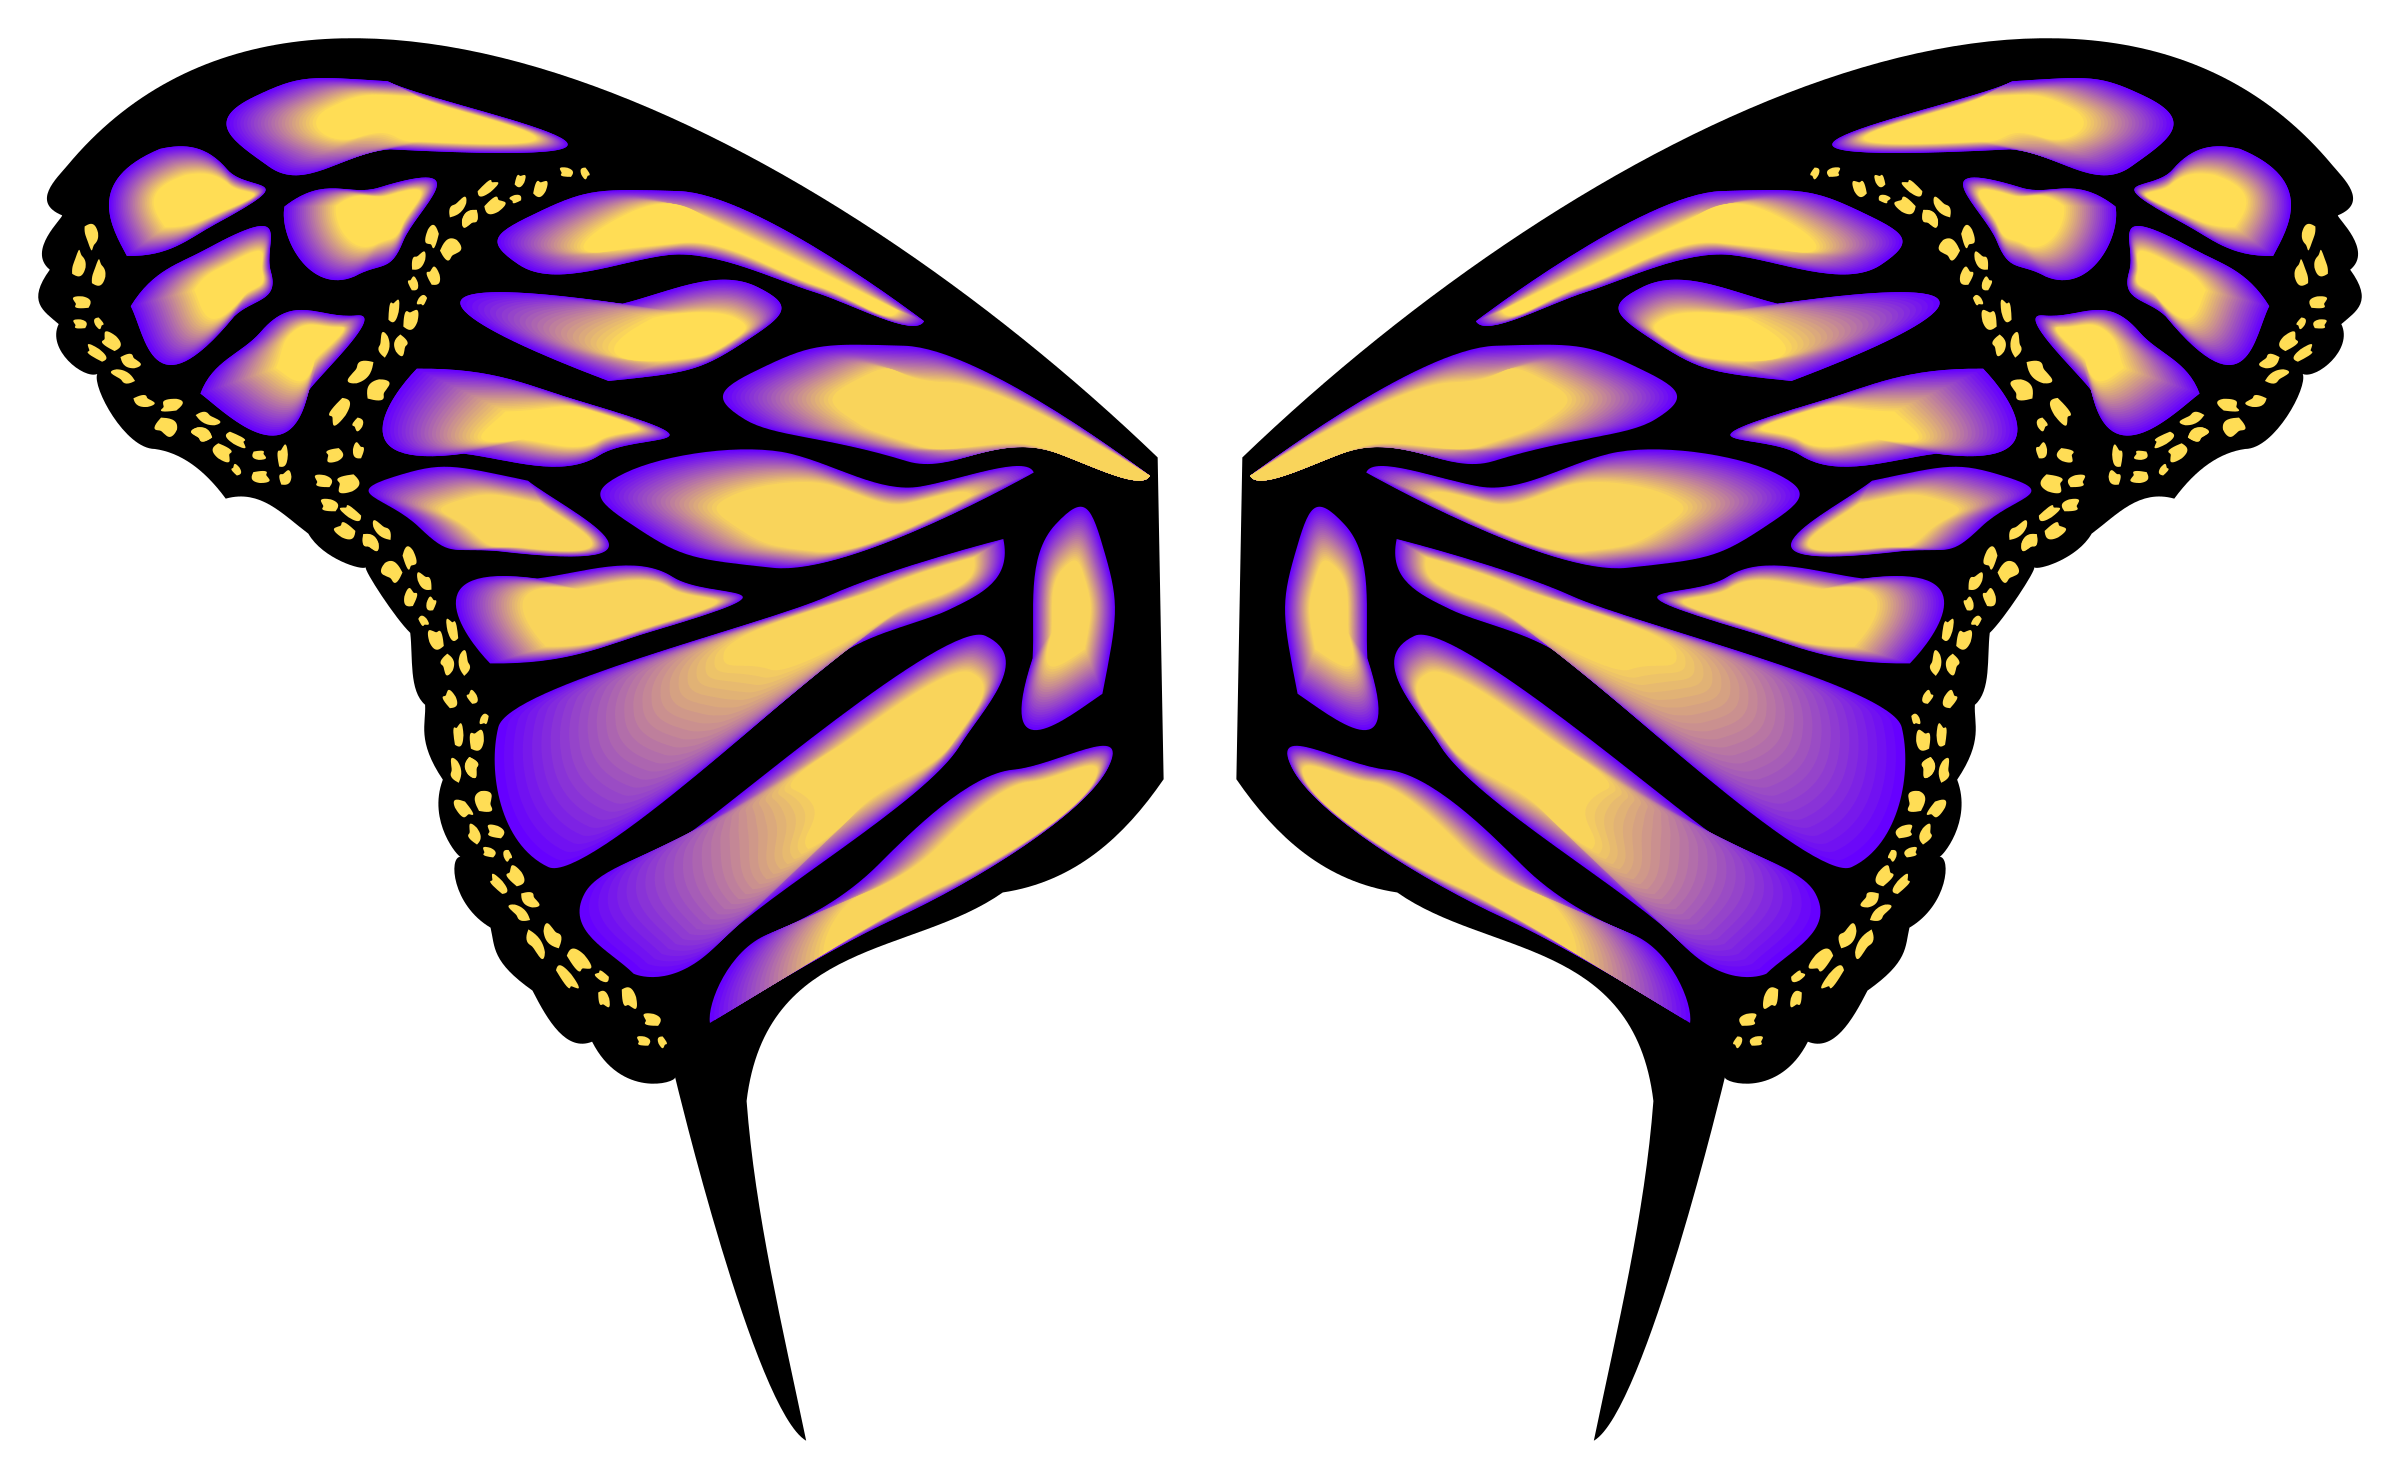 Butterfly wing clipart